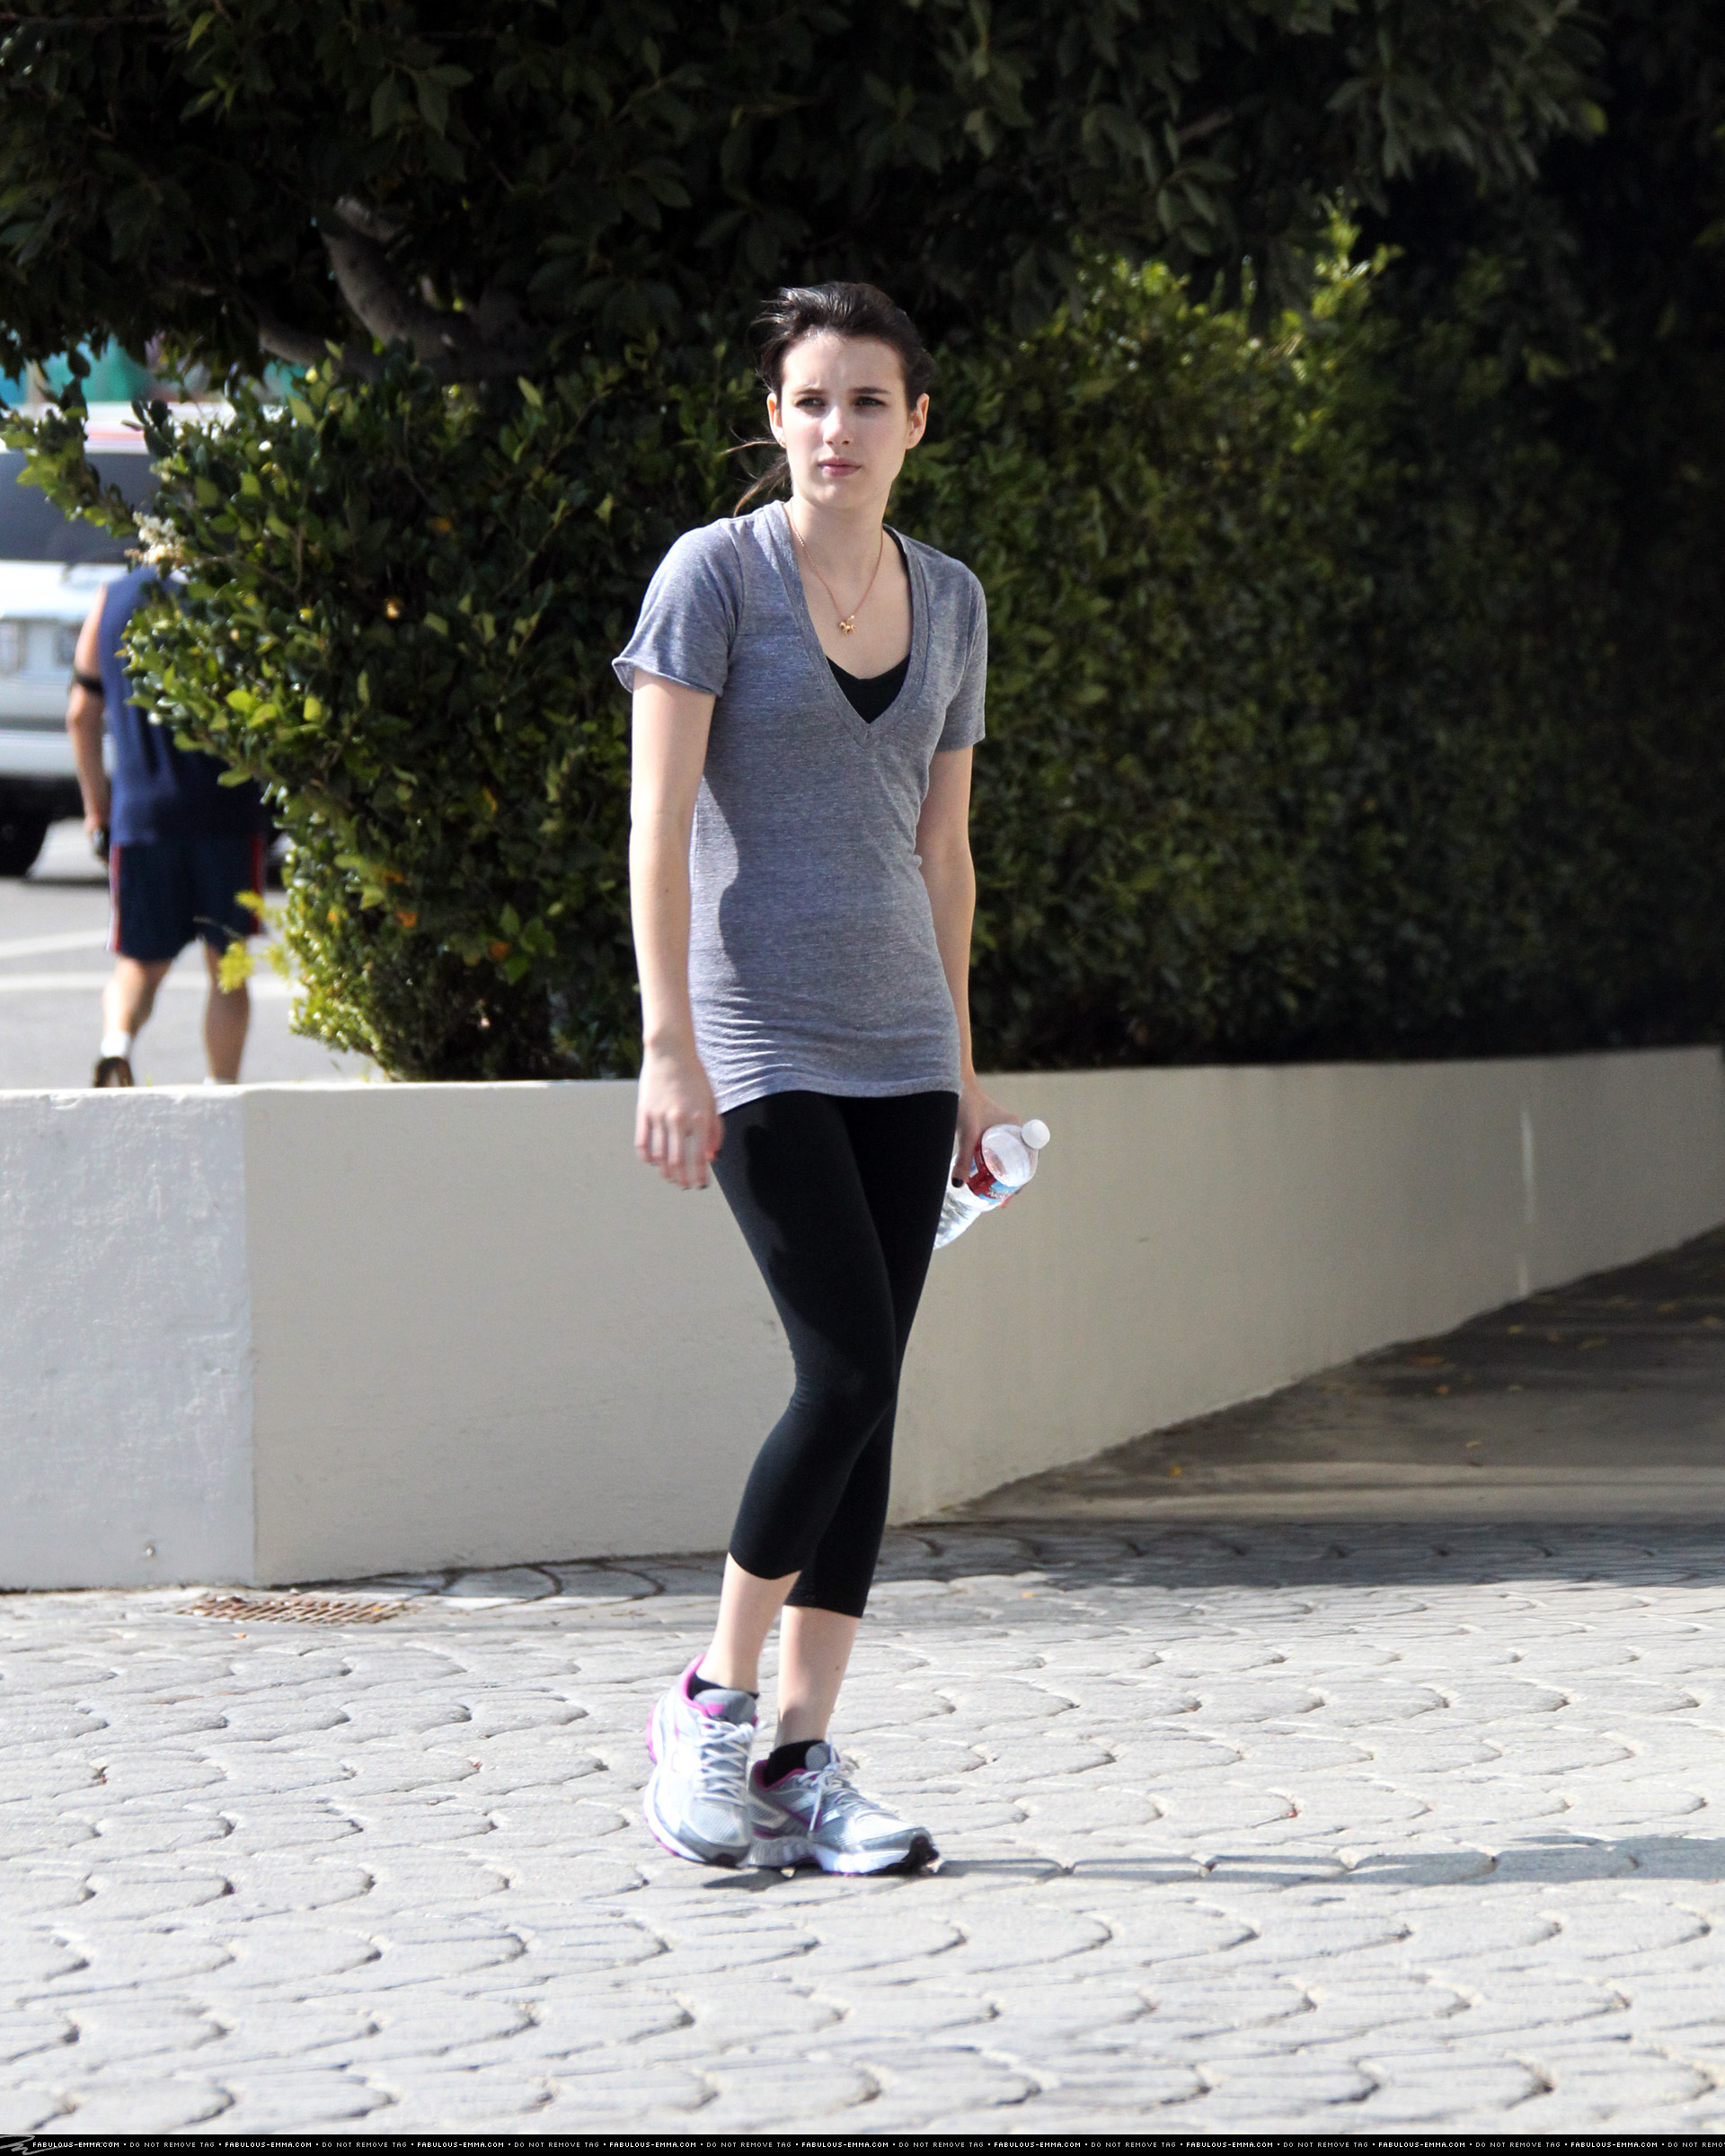 Emma out for a jogging